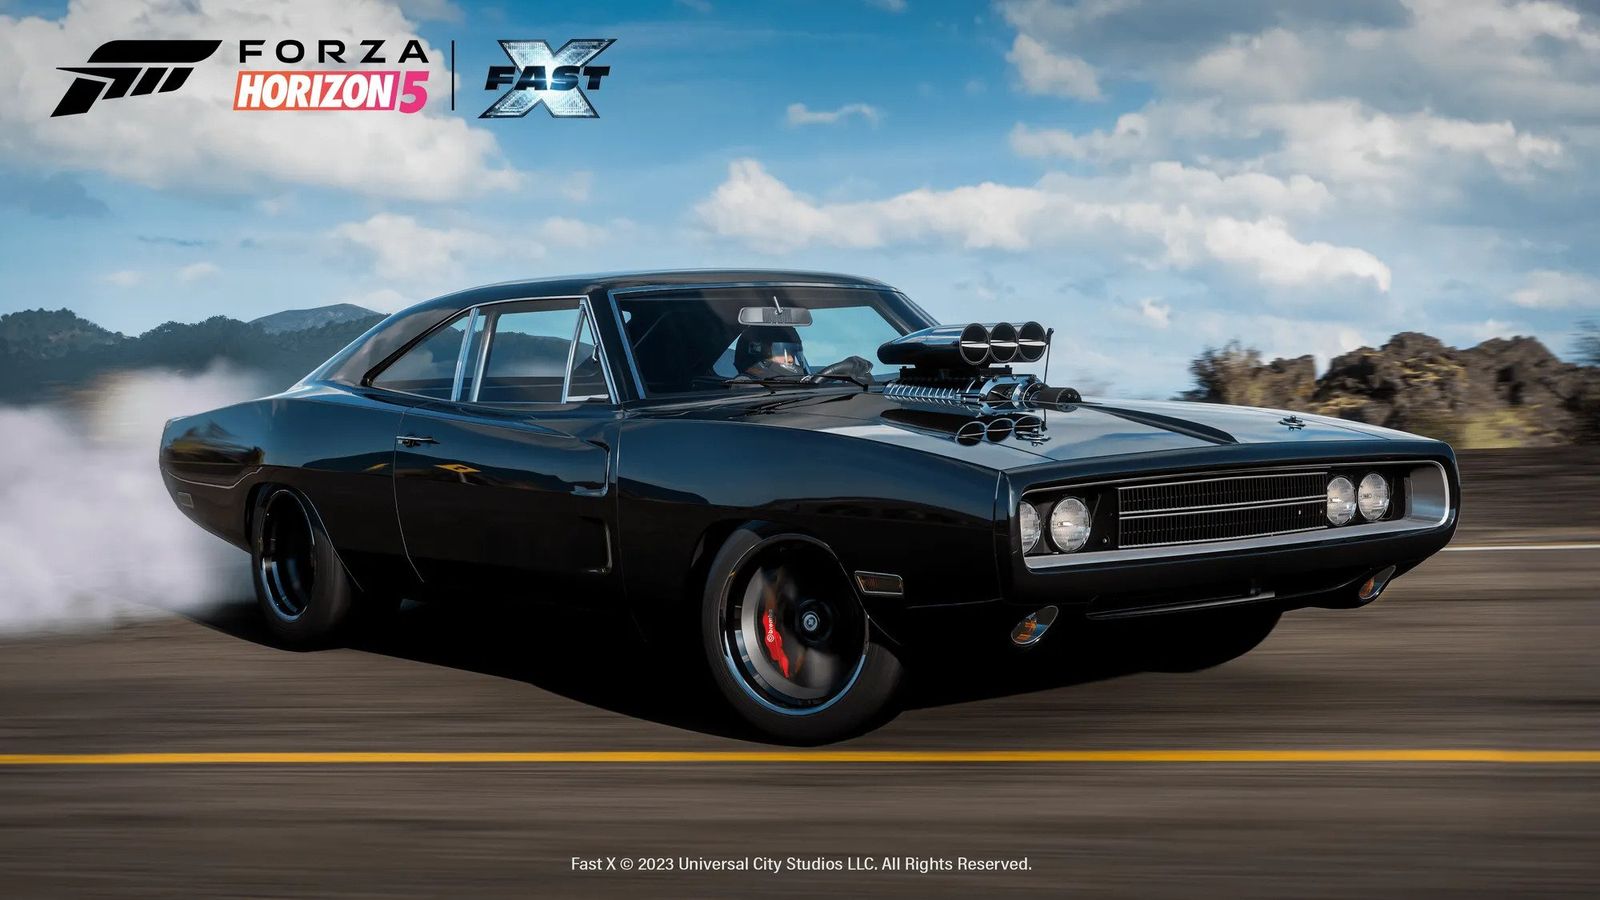 Forza Horizon 5 1970 Dodge Charger Fast X